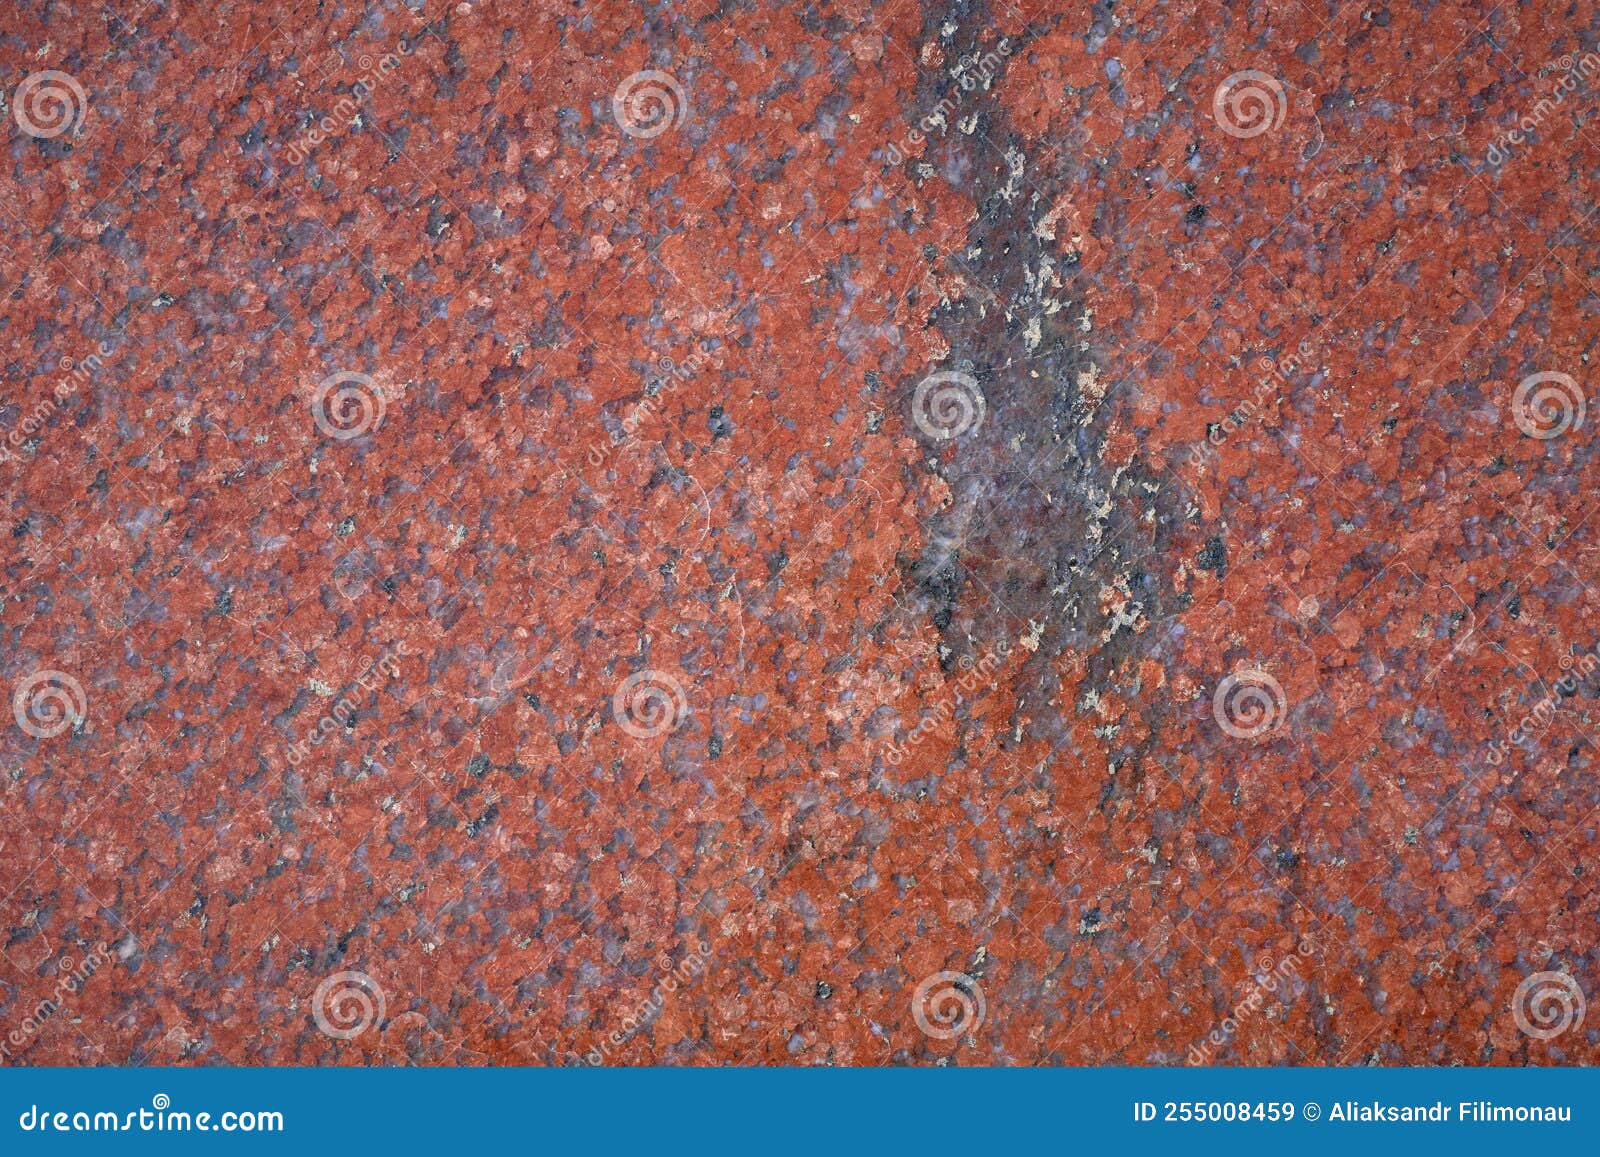 Background Texture of Polished Red Granite, Close-up. Stock Image ...